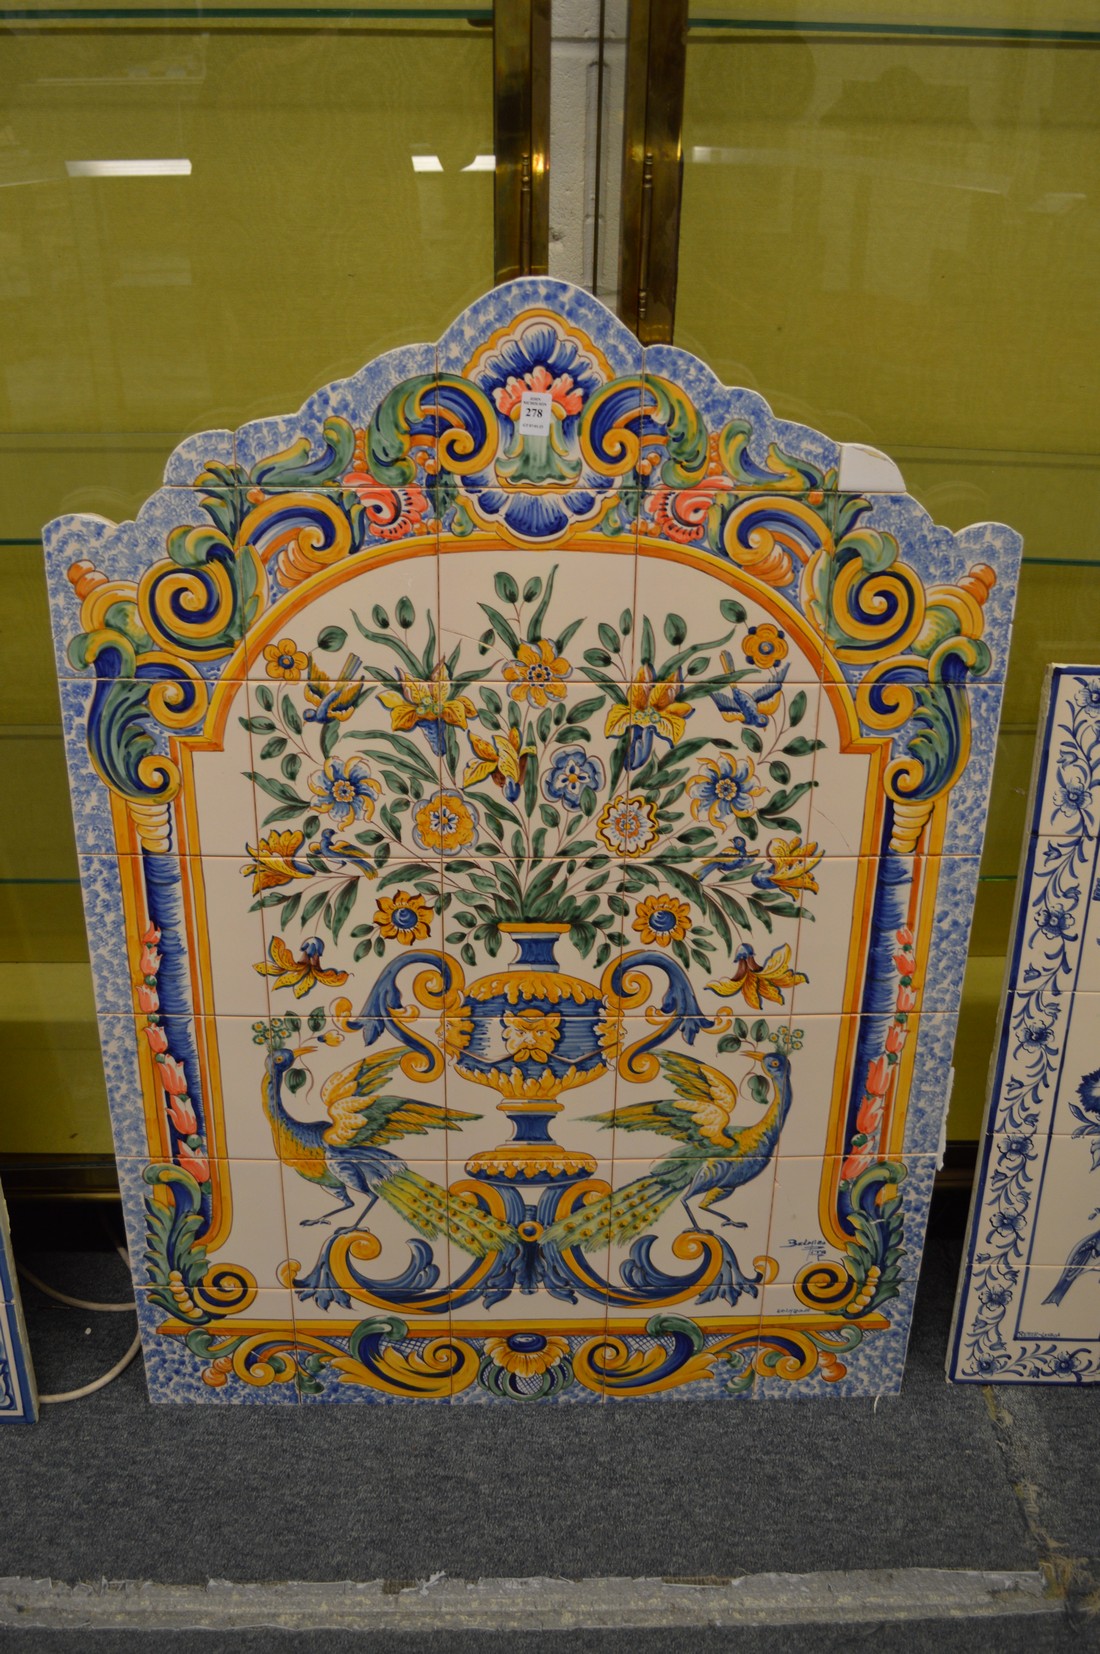 A colourful Continental style tile picture depicting flowers in a vase.